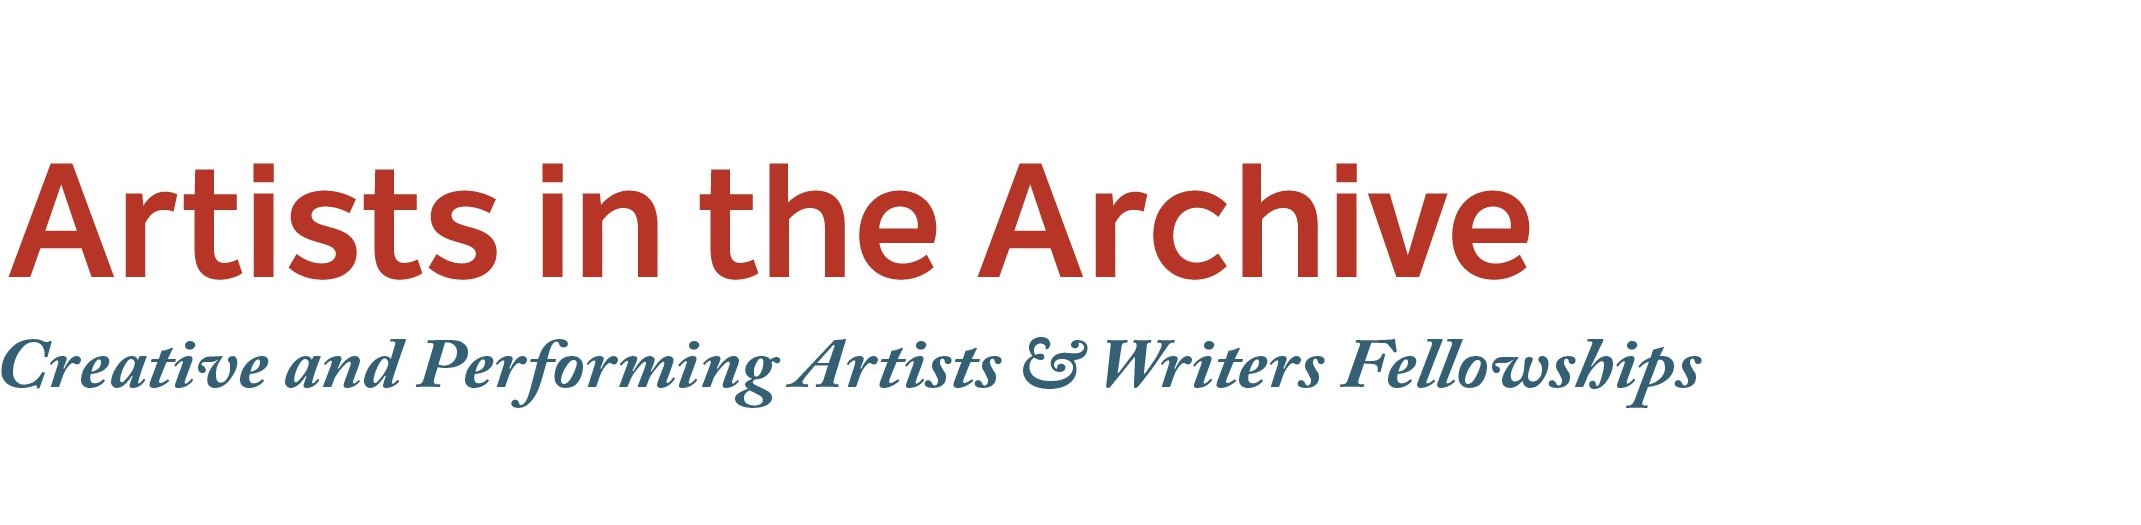 Artists in the Archive: Twenty-Five Years of Creative and Performing Artists and Writers Fellowships